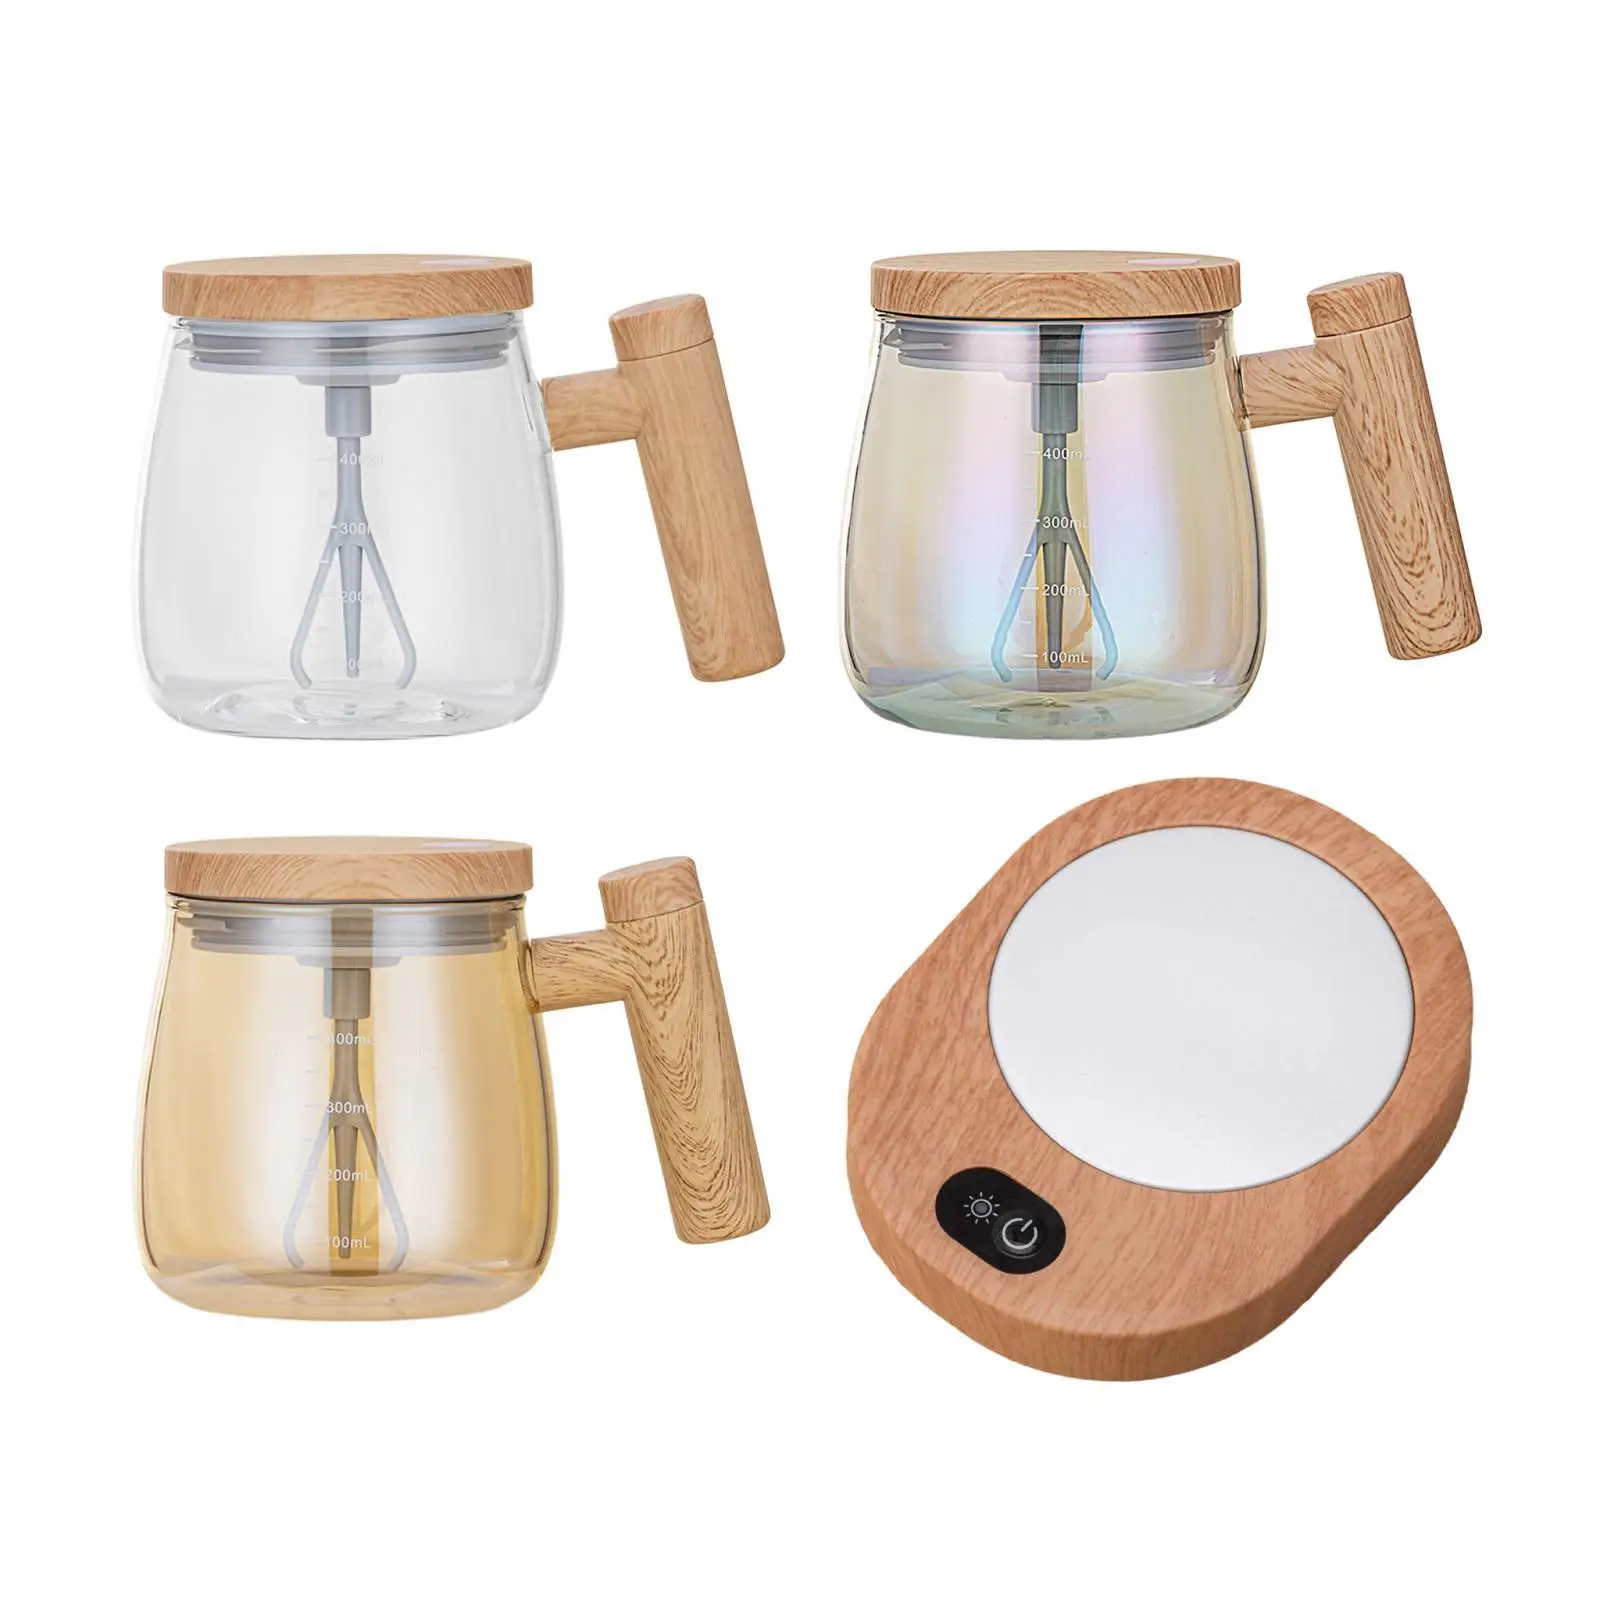 Auto Stirring Mug, 400ML Electric Mixing Cup Auto Stirring Coffee Mug Glass Mixing Coffee Mug Stirring Cup